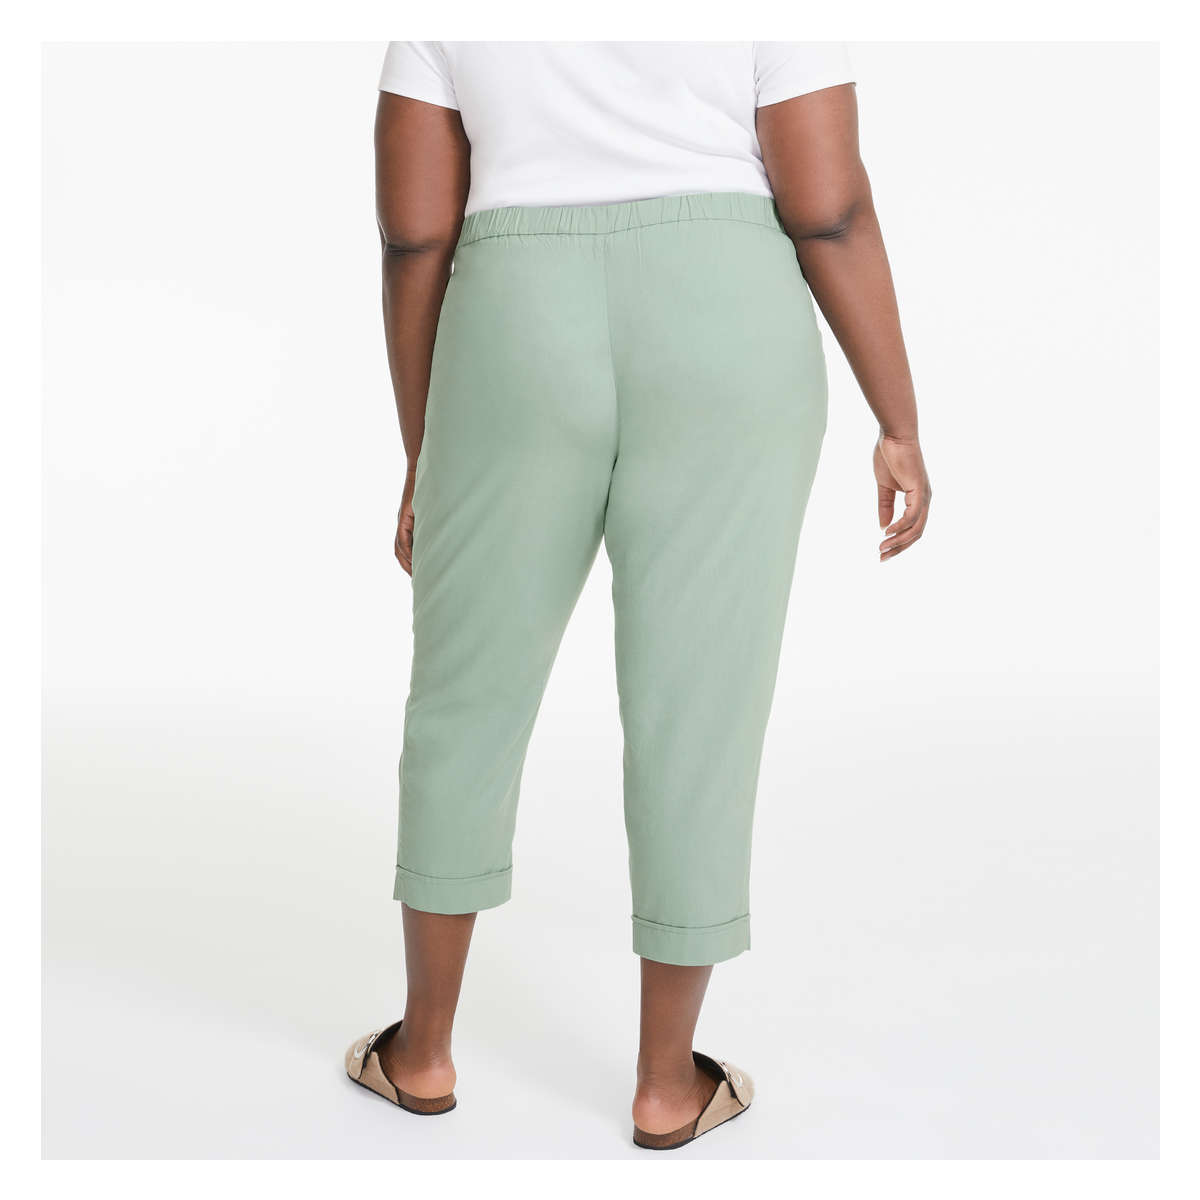 AMBTN VerT.  Complete your outfit with our comfortable AMBTN 'Pant'.